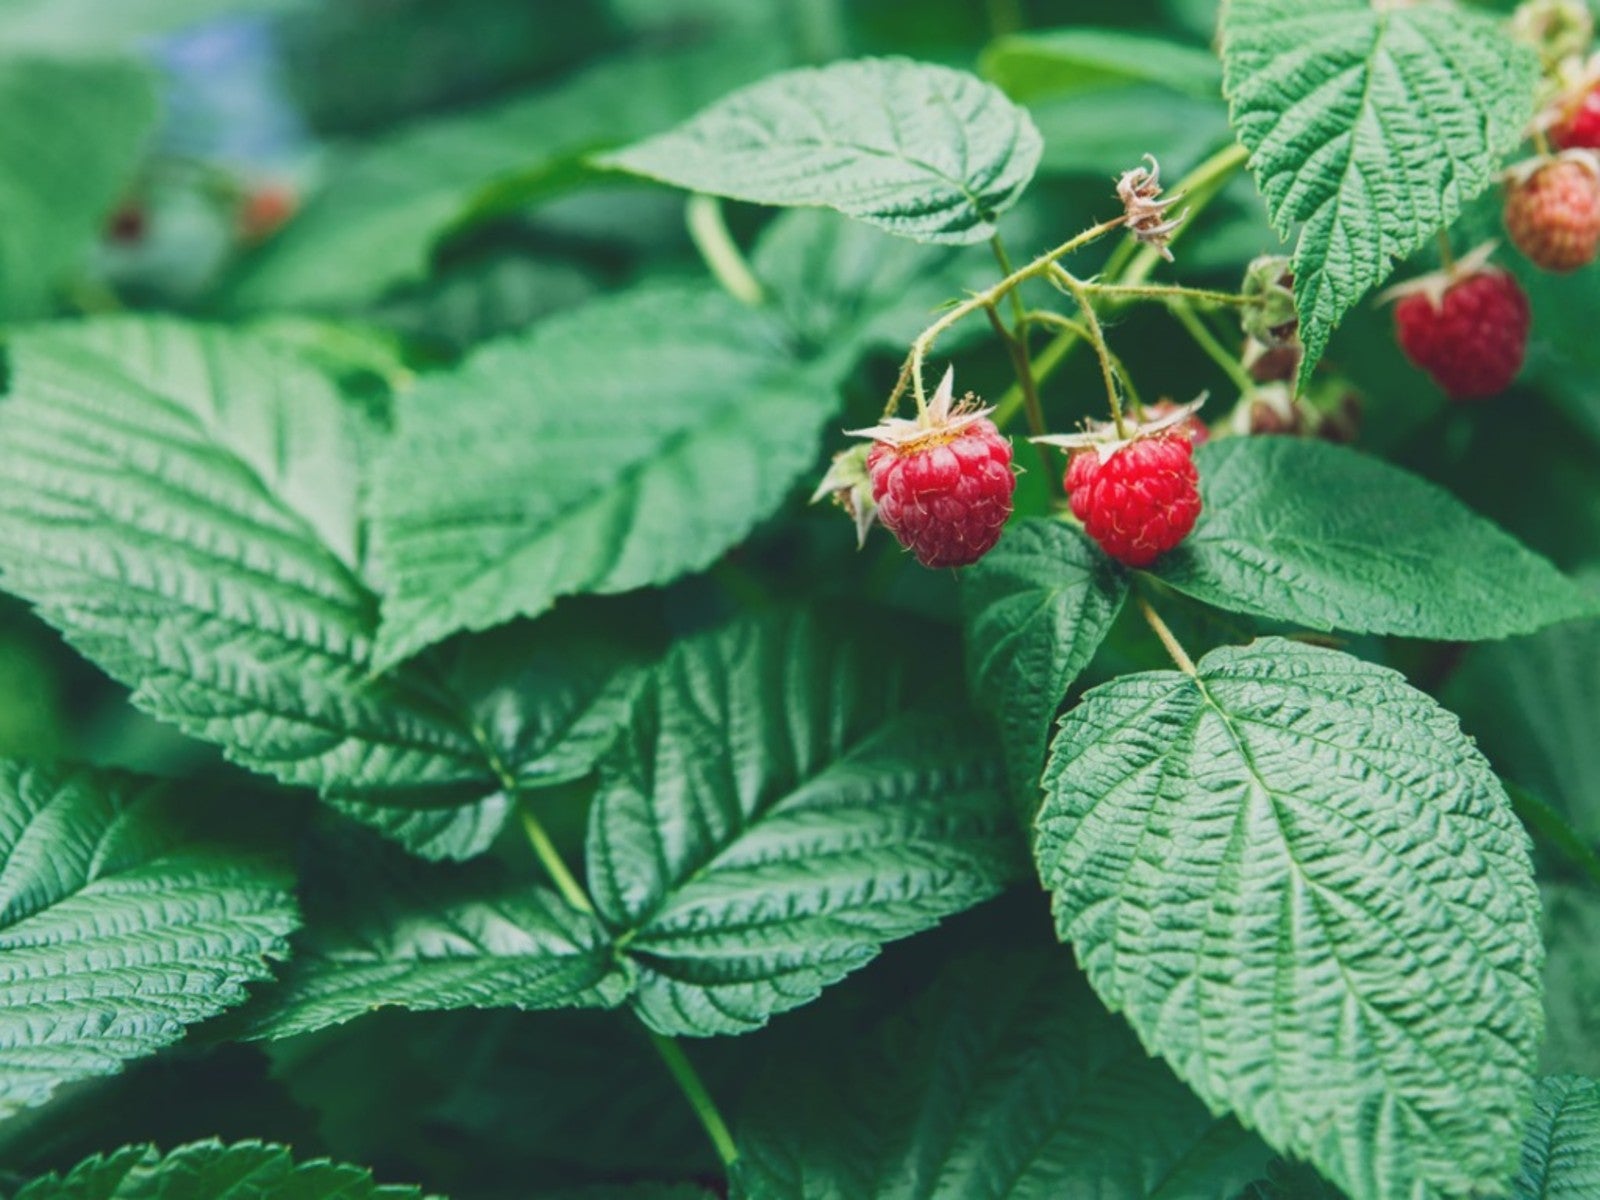 Raspberry Plant With No Berries: Raspberries Won't Form